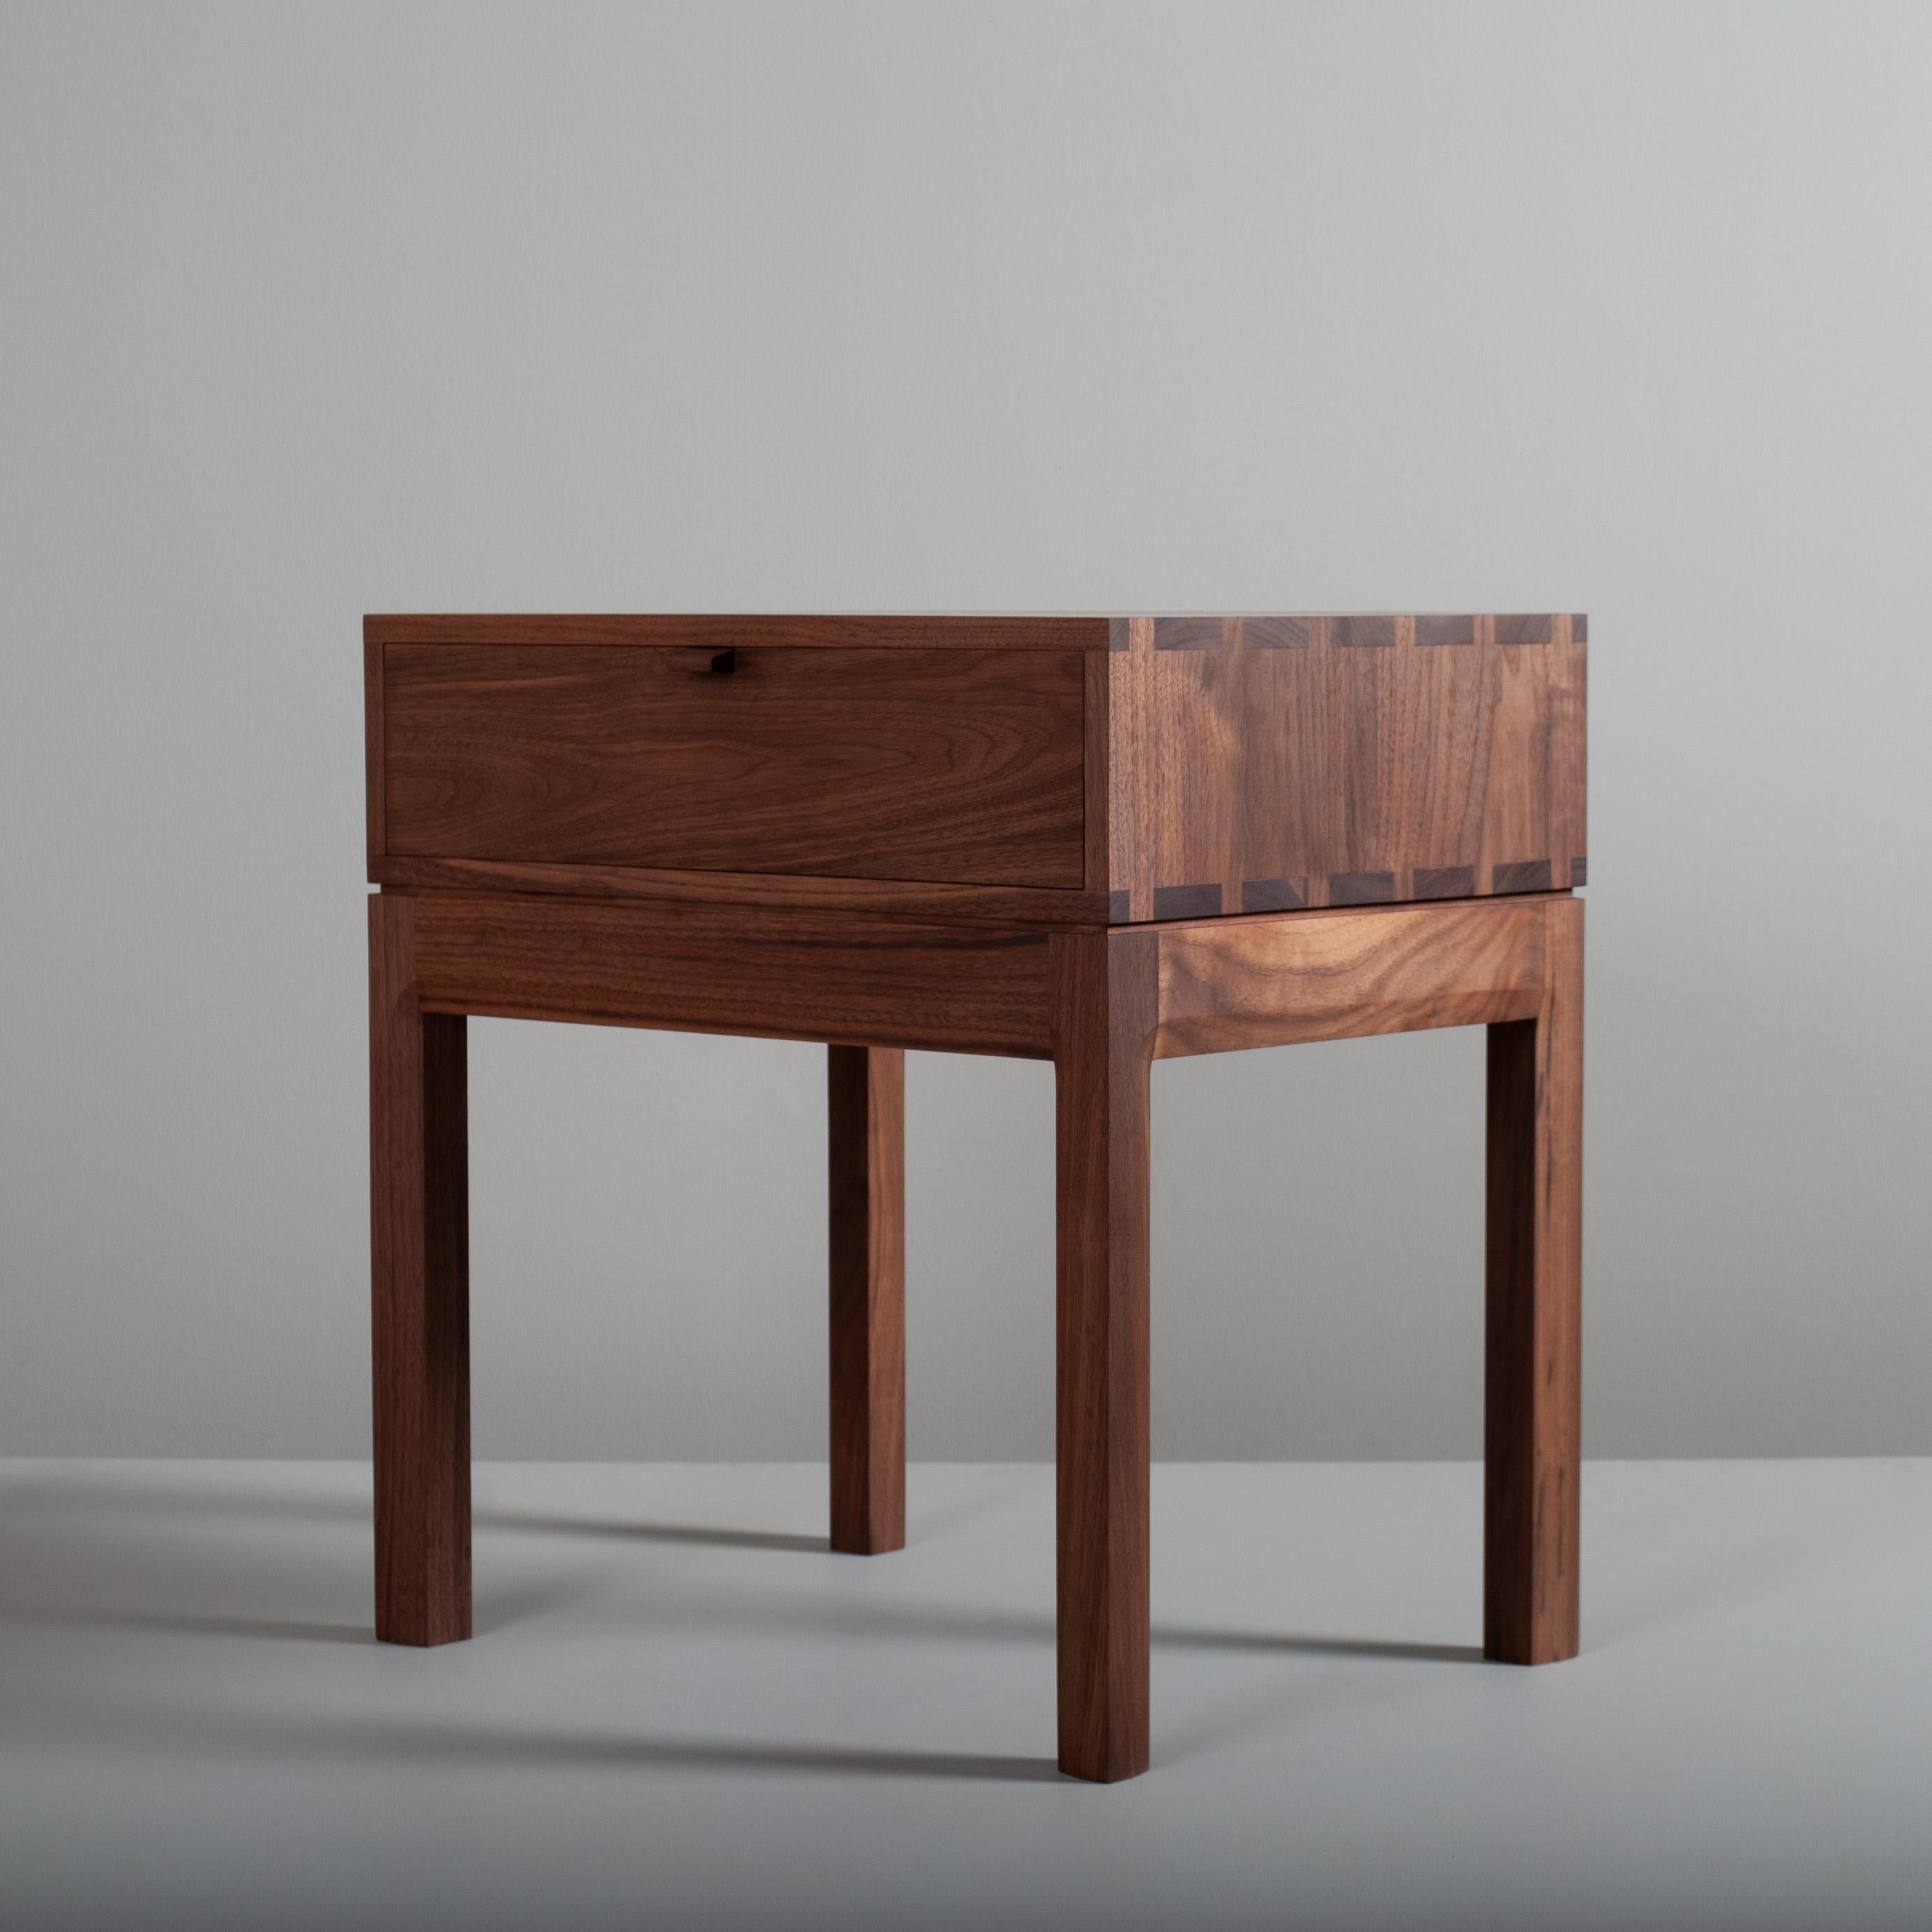 Hand-Crafted Handcrafted Bedside Table, Walnut & Oak For Sale